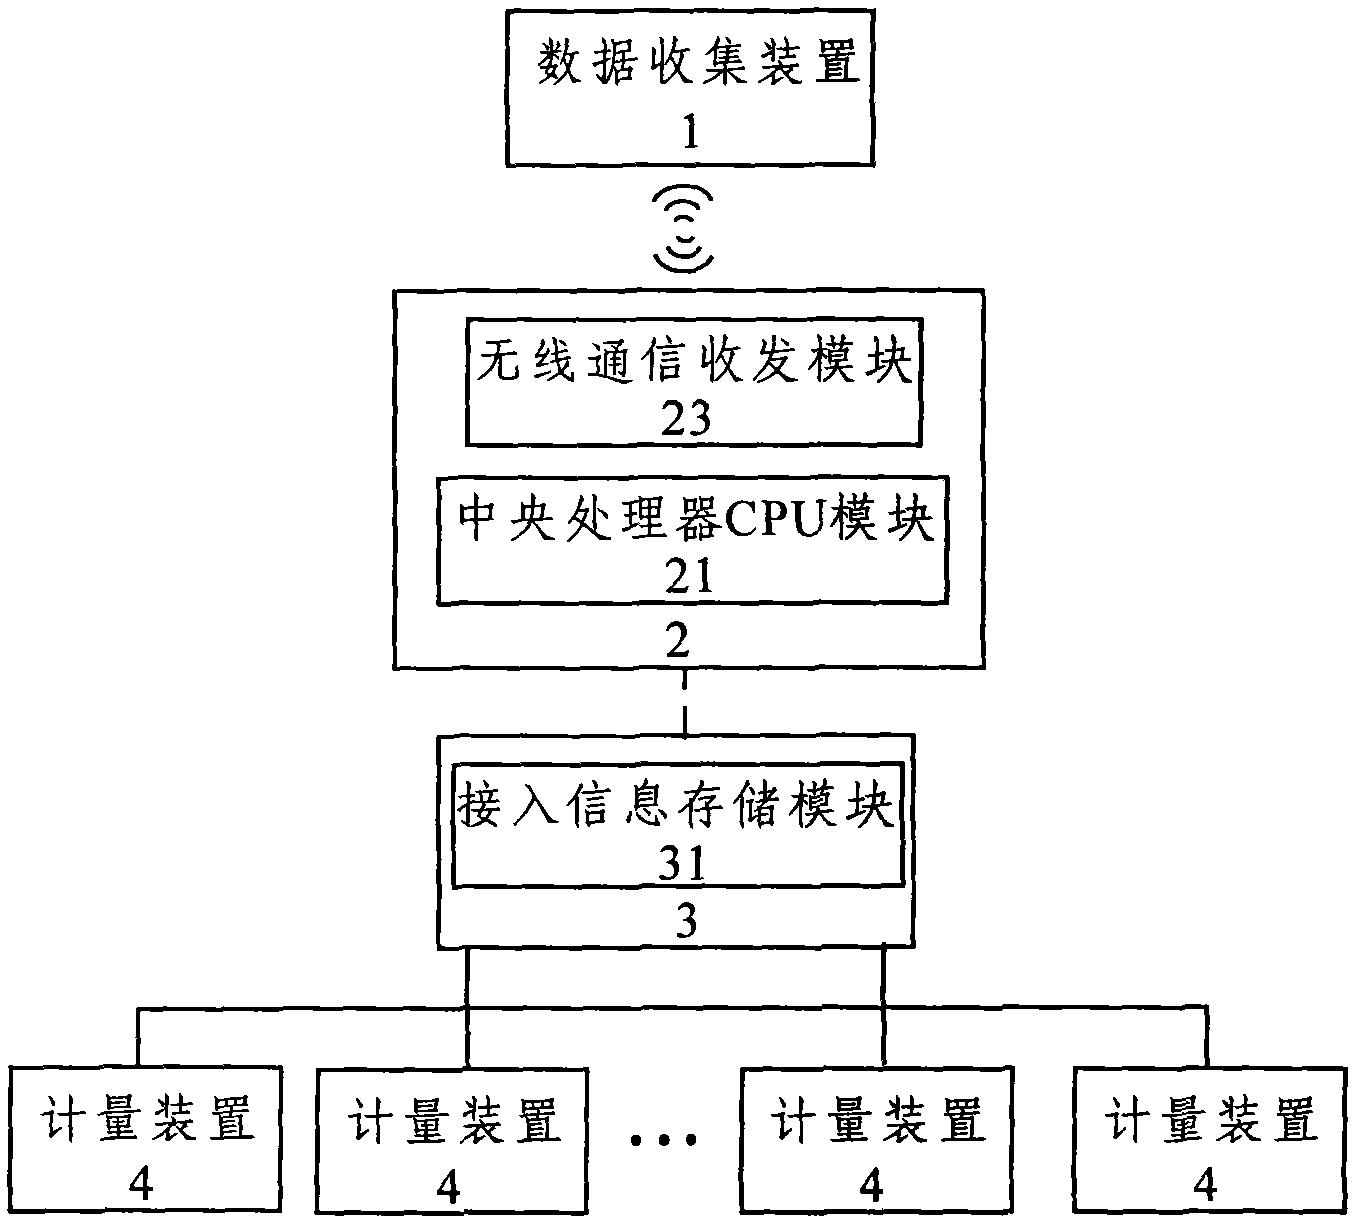 Method and system for collecting measurement data in concentrated copy mode